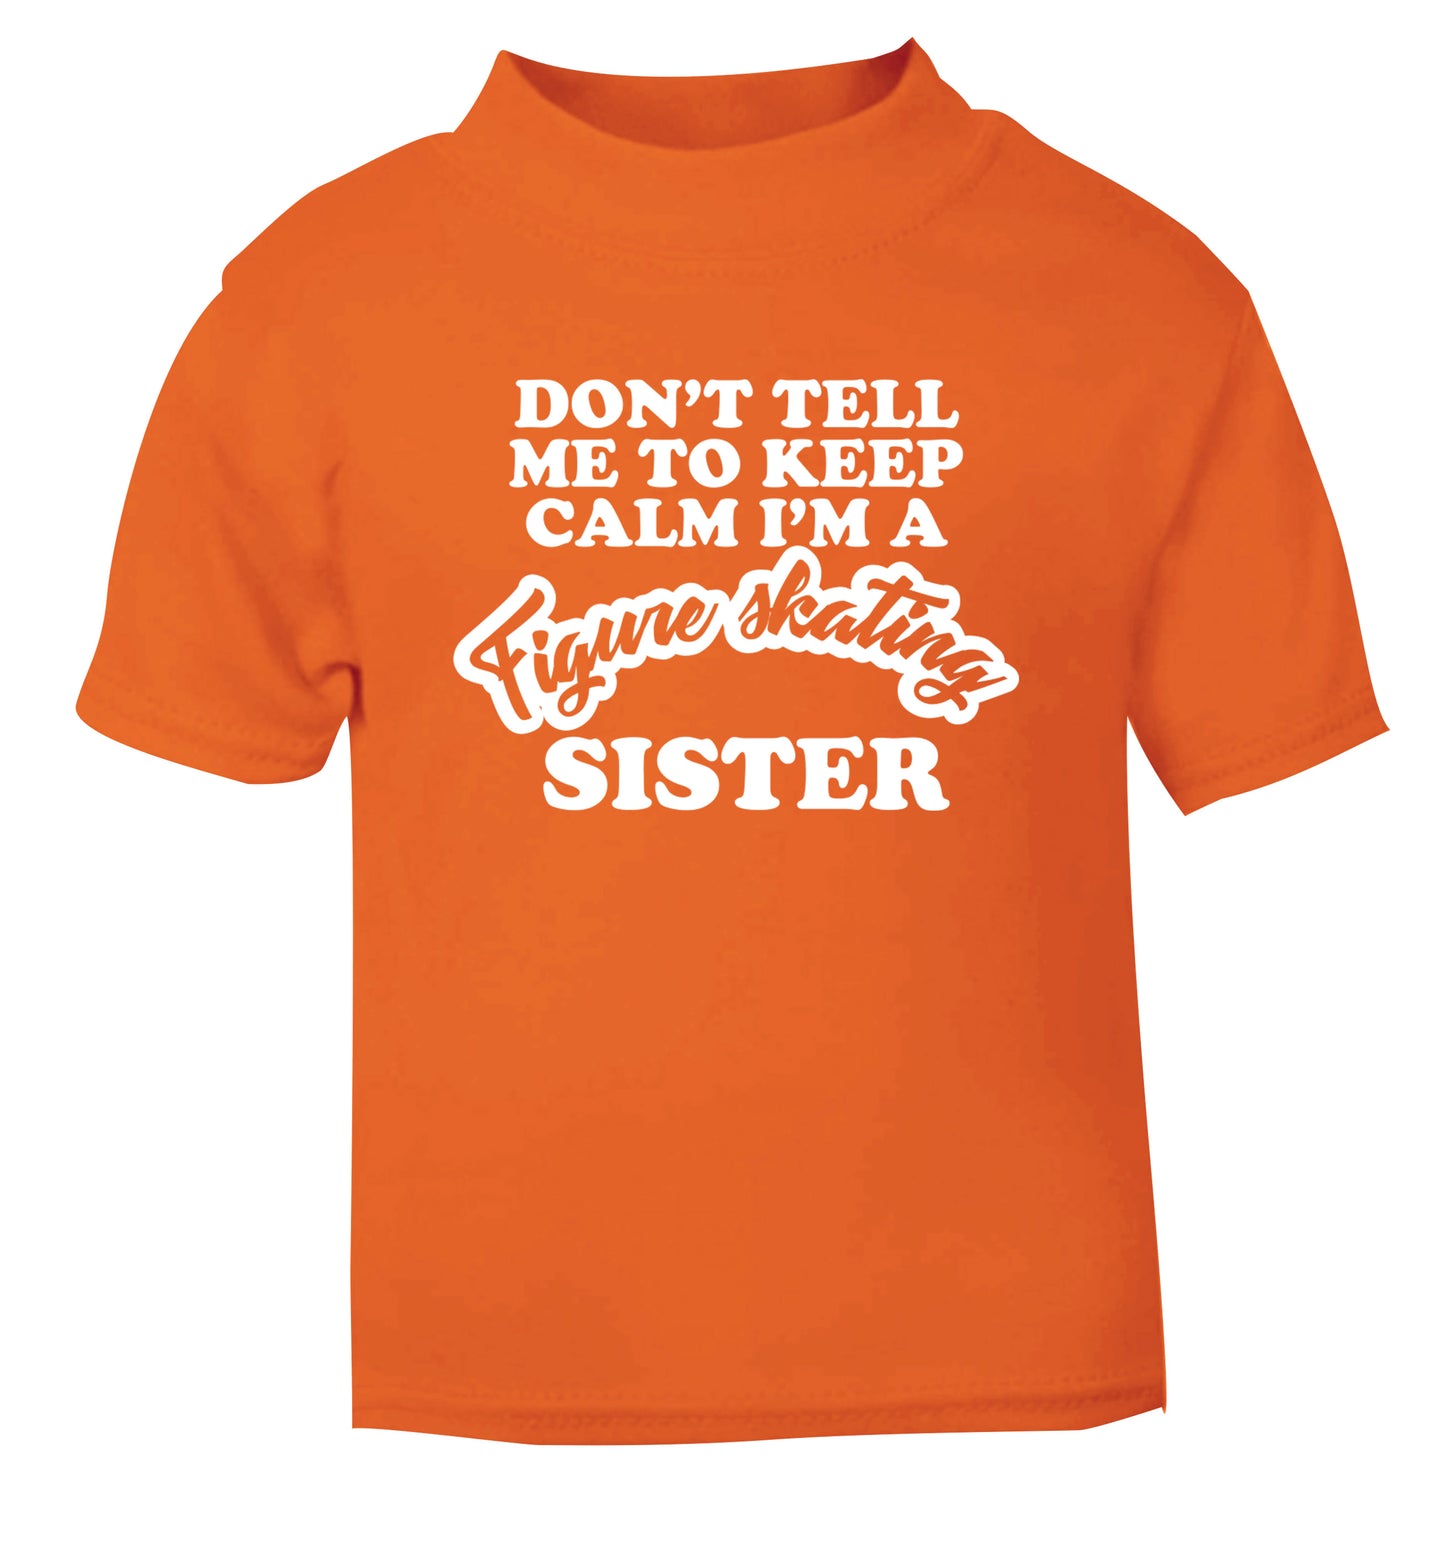 Don't tell me to keep calm I'm a figure skating sister orange Baby Toddler Tshirt 2 Years